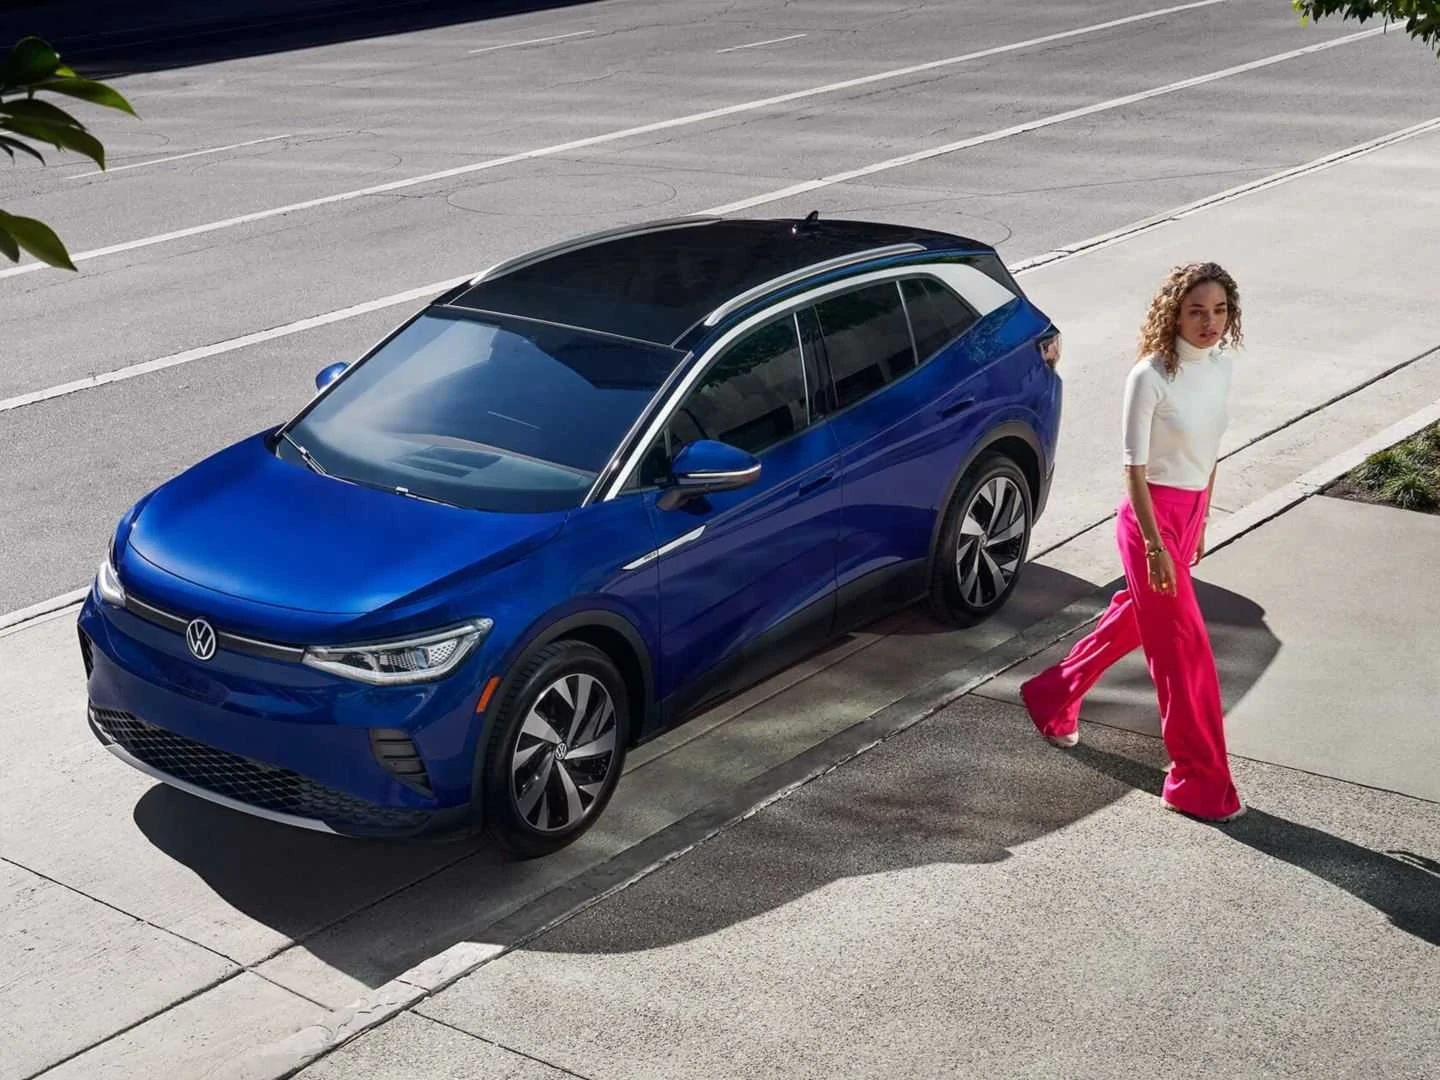 US: 2022 Volkswagen ID.4 Is Coming With ...